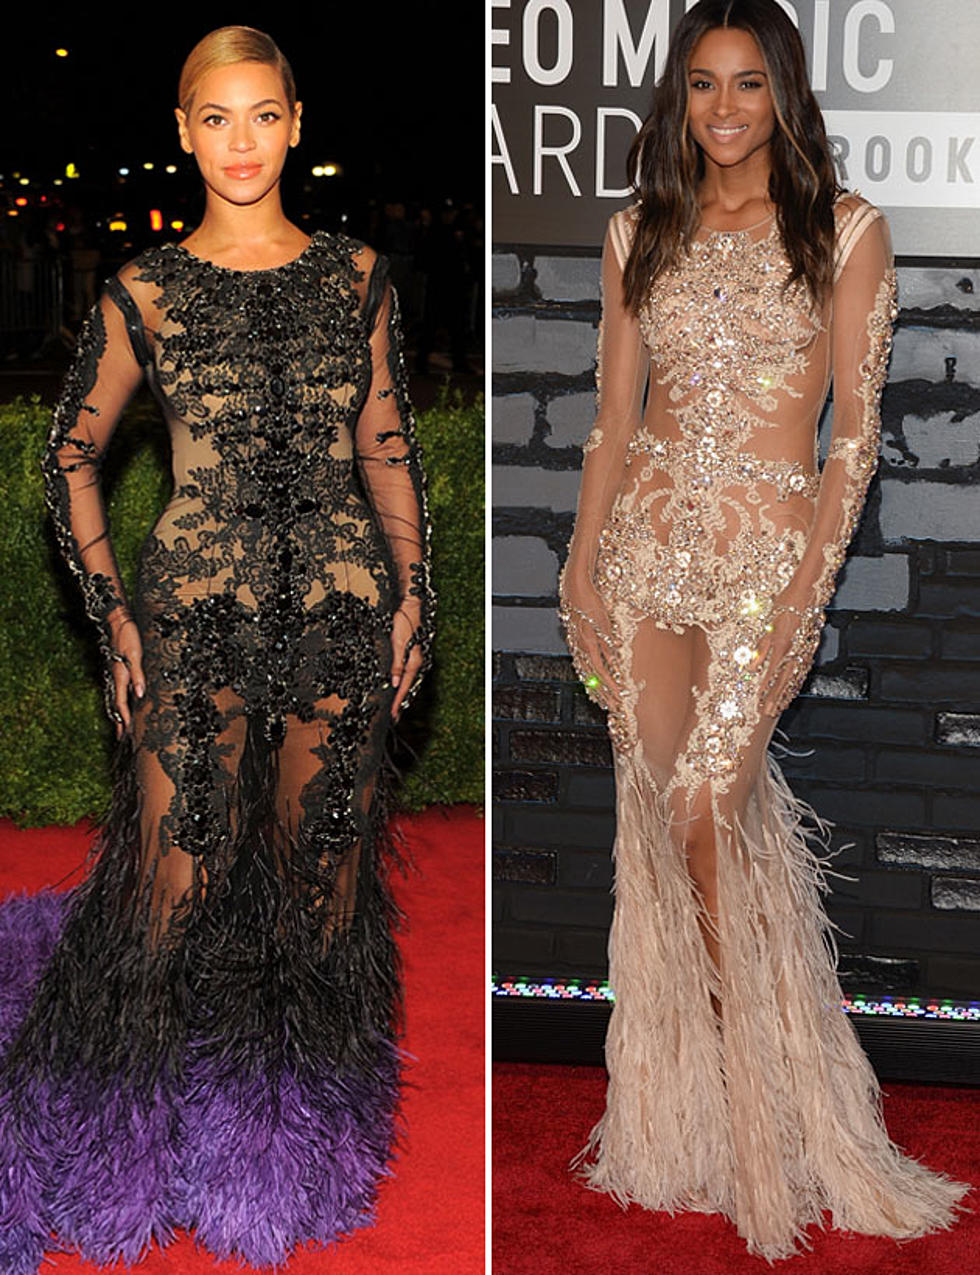 Beyonce vs. Ciara – Who Wore It Best?